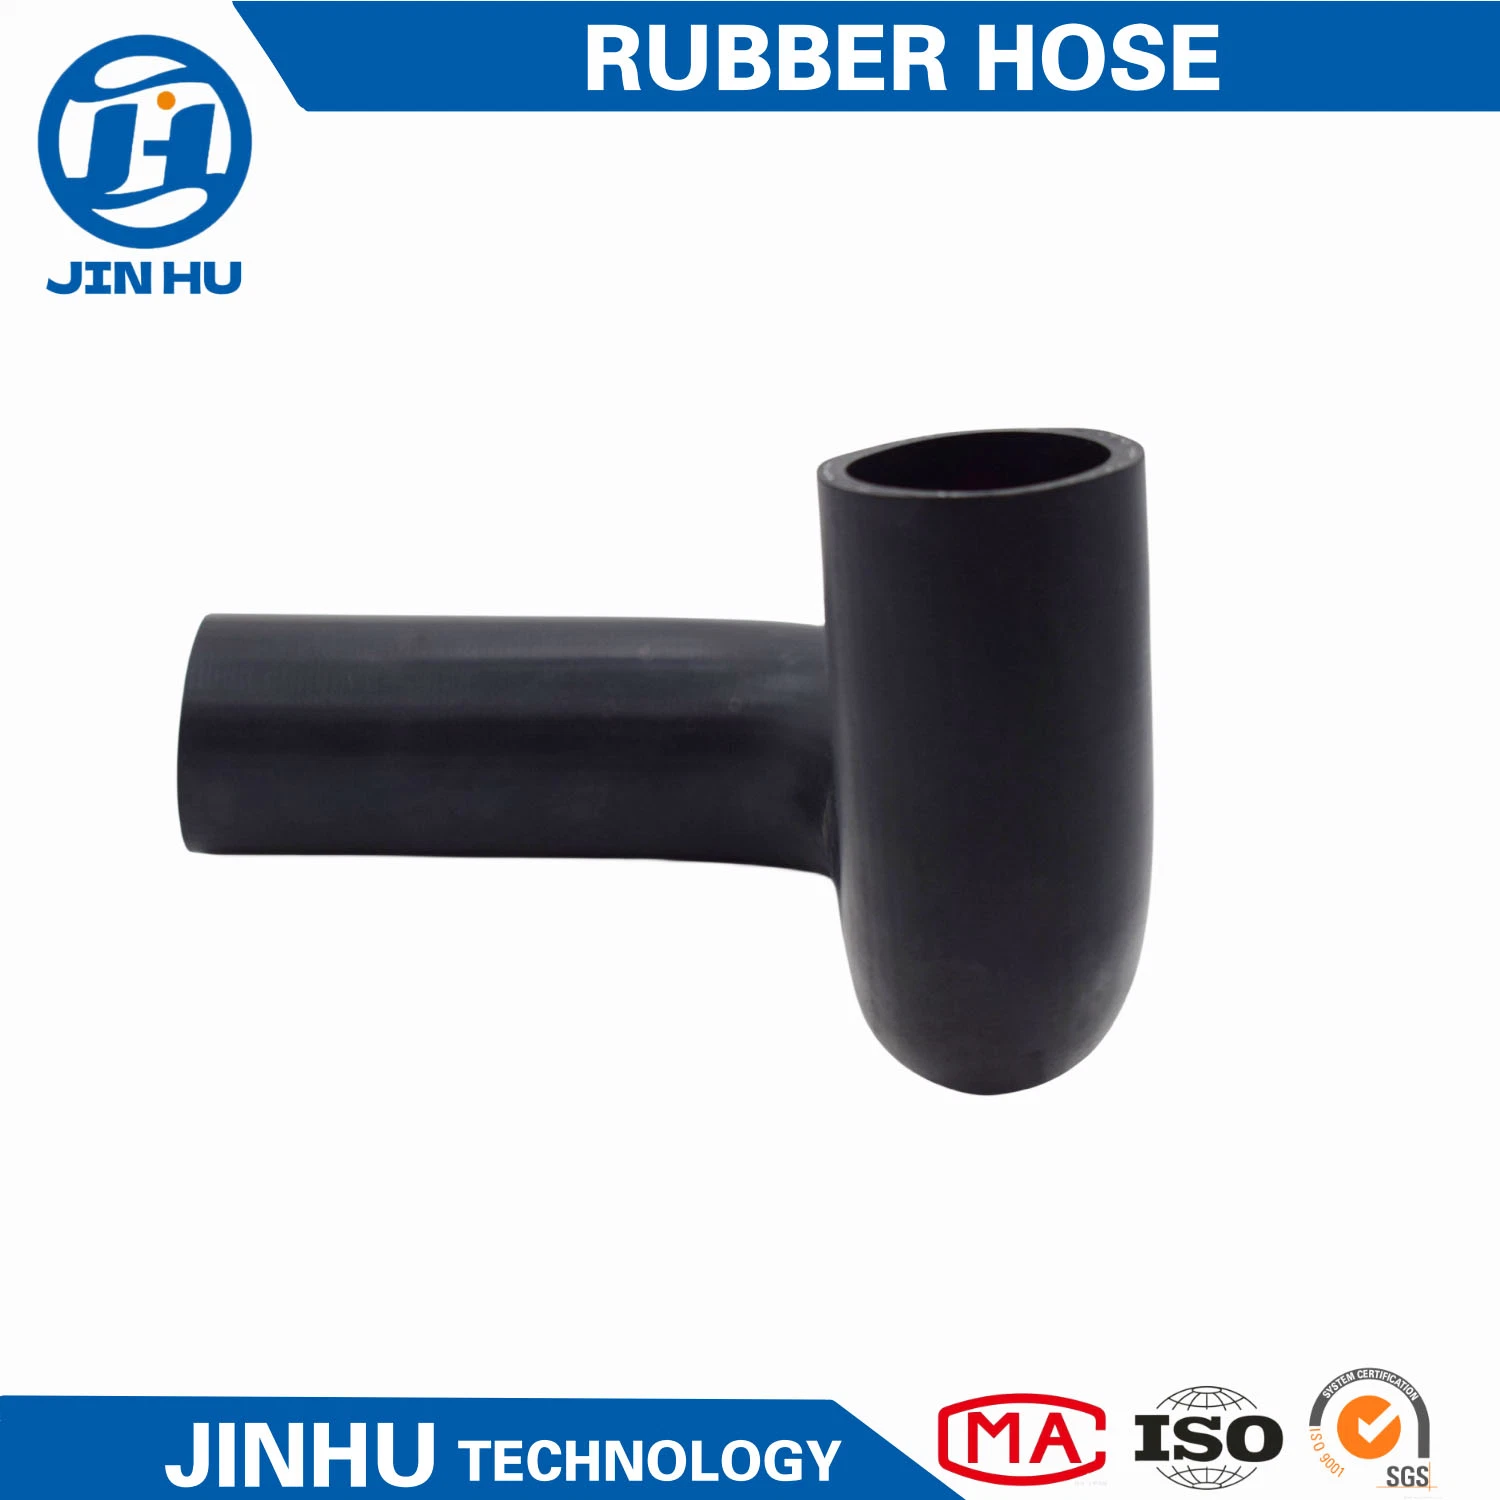 Jinhu Repeat Buyers Choice 1sn 2sn 4sp 4sh High Pressure Hydraulic Rubber Hose Hoses Hydraulic and Fittings